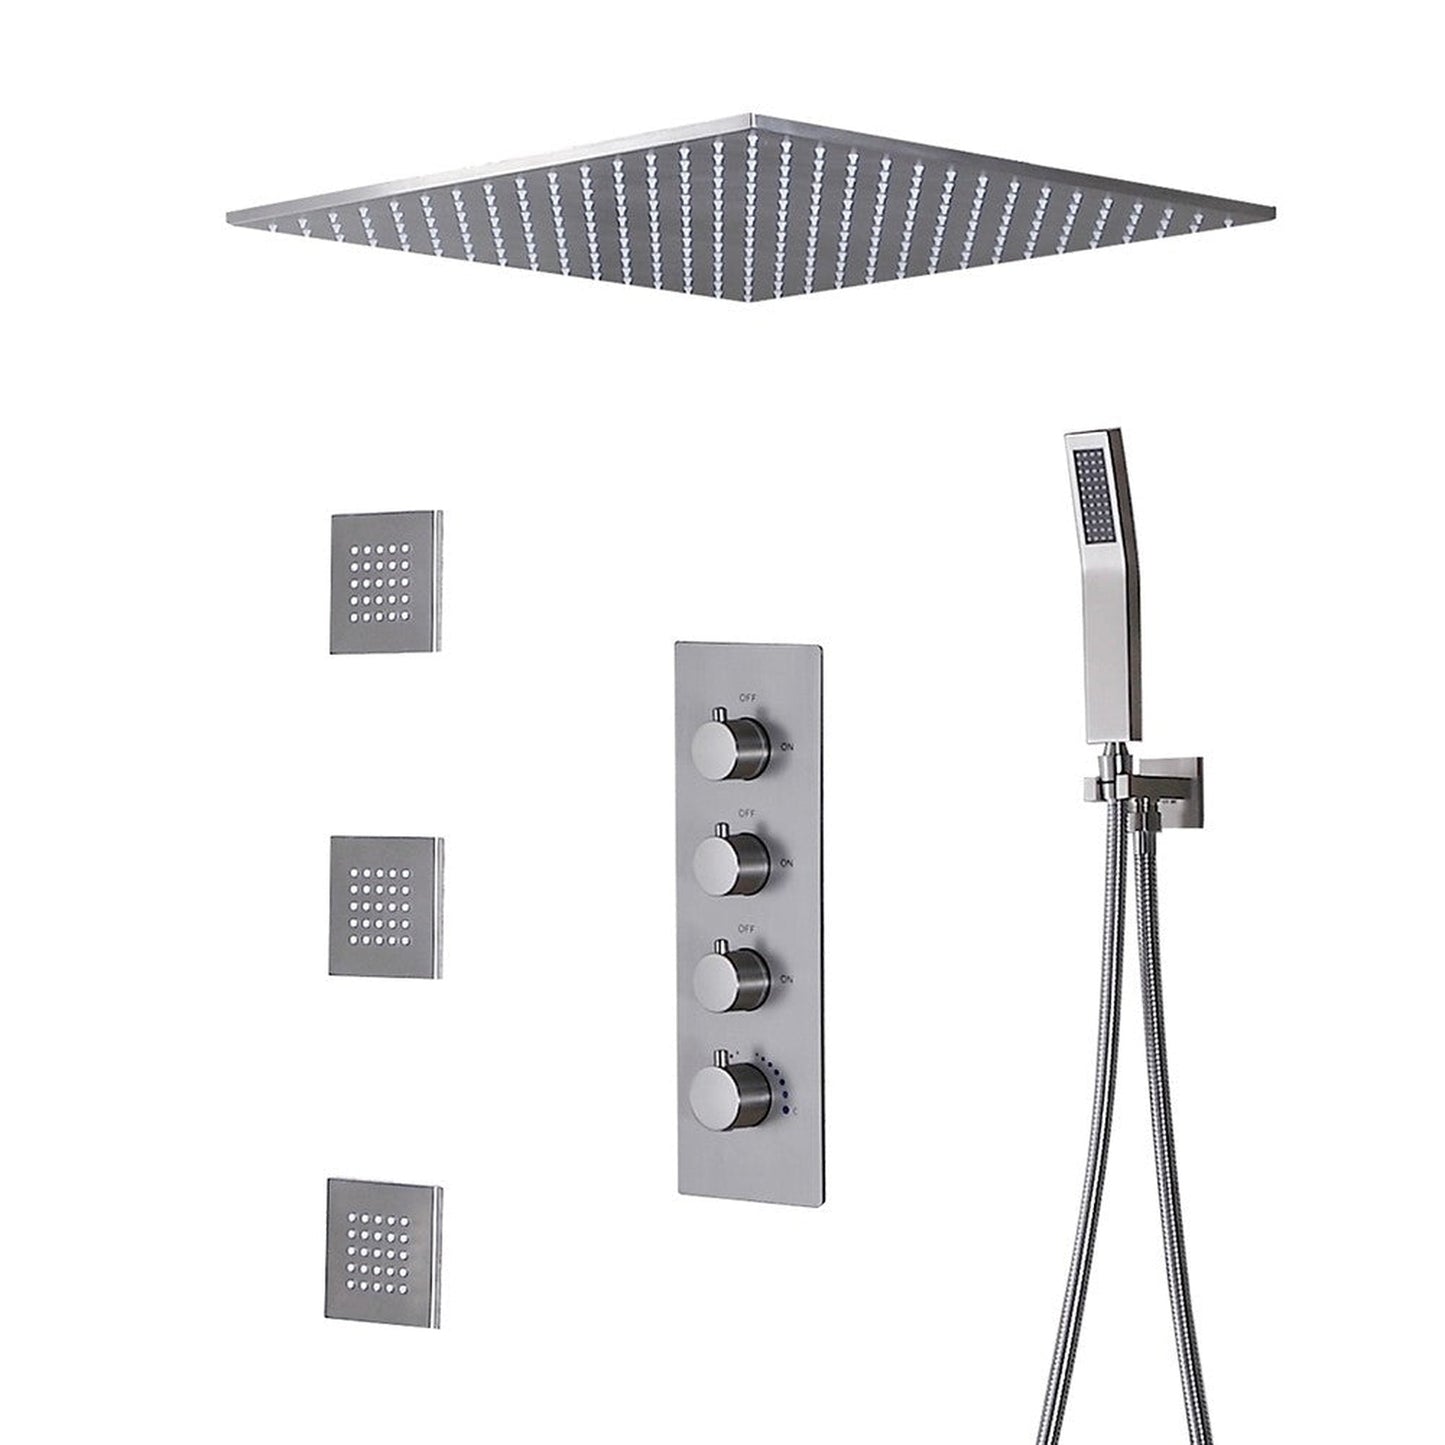 Fontana 40" x 20" Brushed Nickel Ceiling Mounted Thermostatic Valve Shower System With 3-Jet Sprays, Hand Shower and Water Powered LED Lights